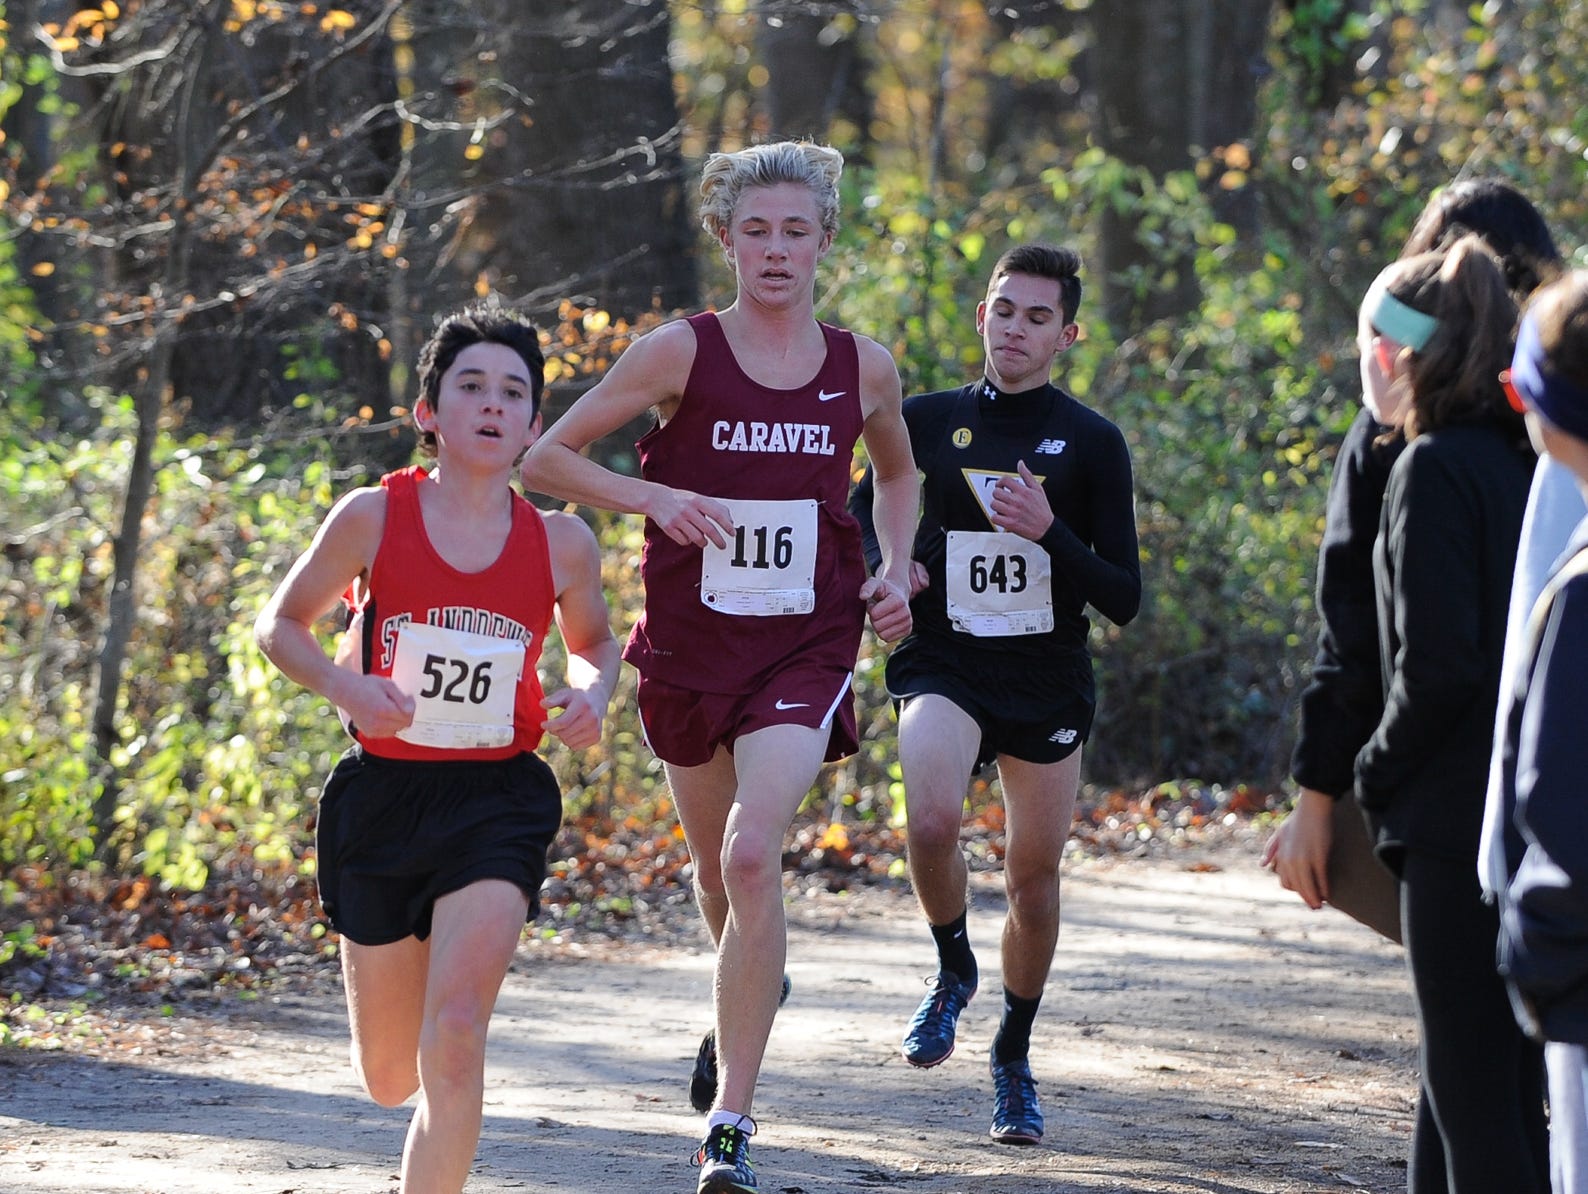 Boy's race in the Division II DIAA Cross Country State Championships at Killens Pond State Park in Felton.